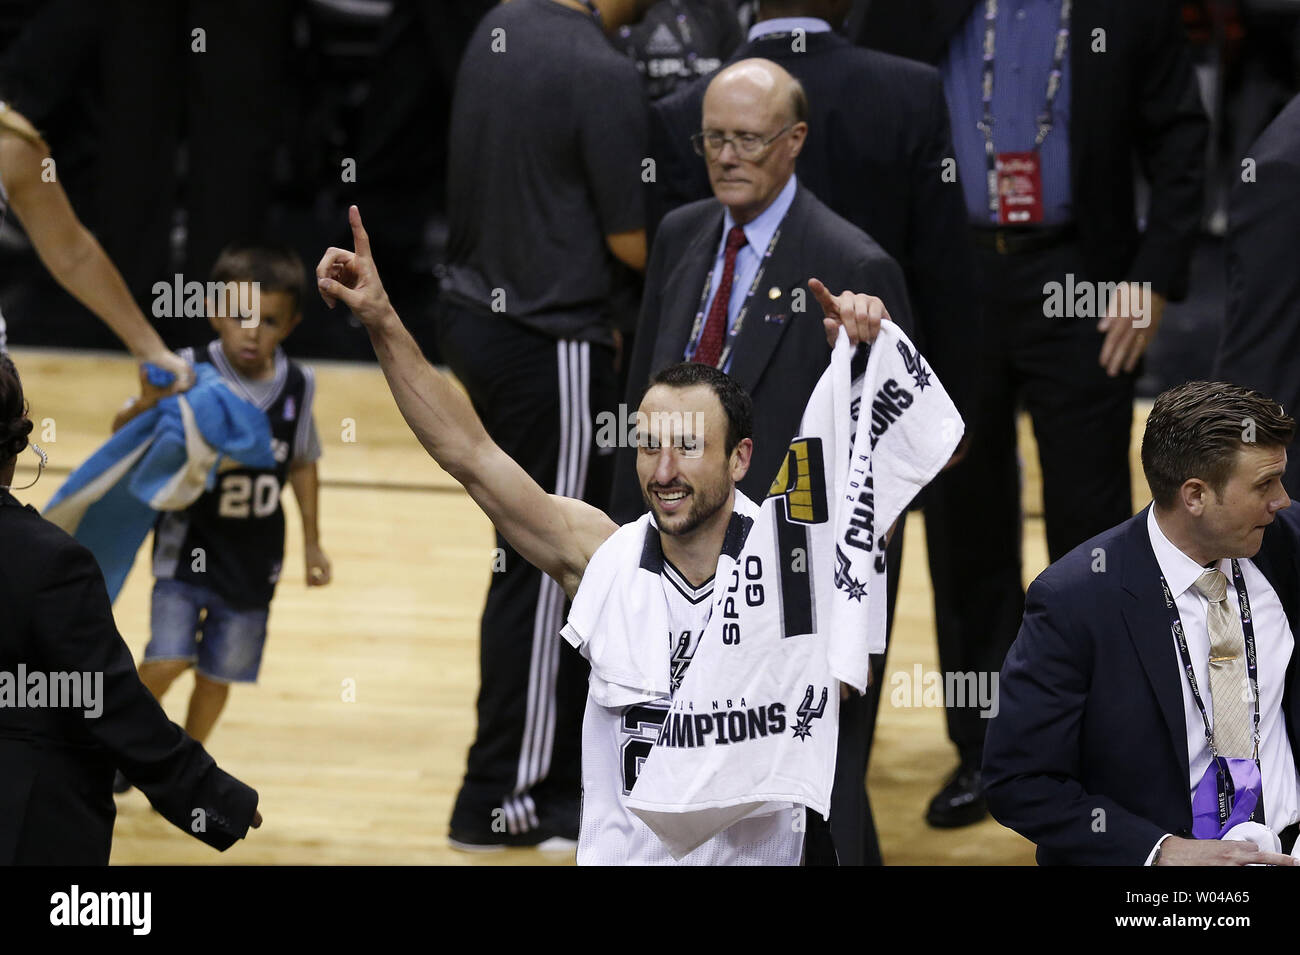 San Antonio Spurs guard Manu Ginobili (20) celebrates after defeating the Miami Heat following game 5 of the NBA Finals at the AT&T Center at the AT&T Center in San Antonio, Texas on June 15, 2014. The Spurs defeated the Heat 104-87 to win the best of seven series 4-1.     UPI/Aaron M. Sprecher Stock Photo